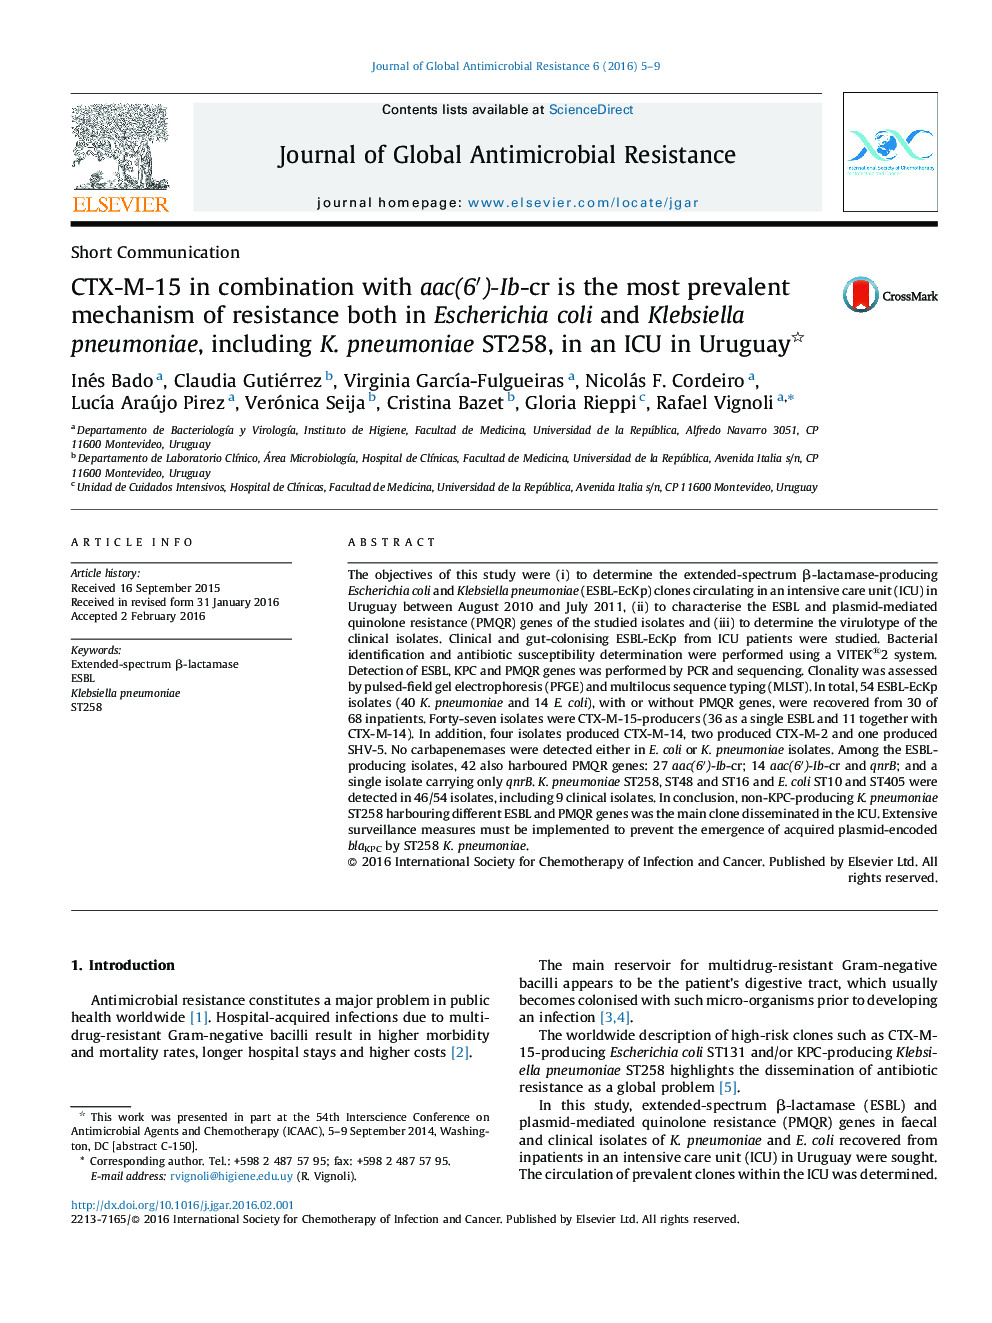 CTX-M-15 in combination with aac(6â²)-Ib-cr is the most prevalent mechanism of resistance both in Escherichia coli and Klebsiella pneumoniae, including K. pneumoniae ST258, in an ICU in Uruguay